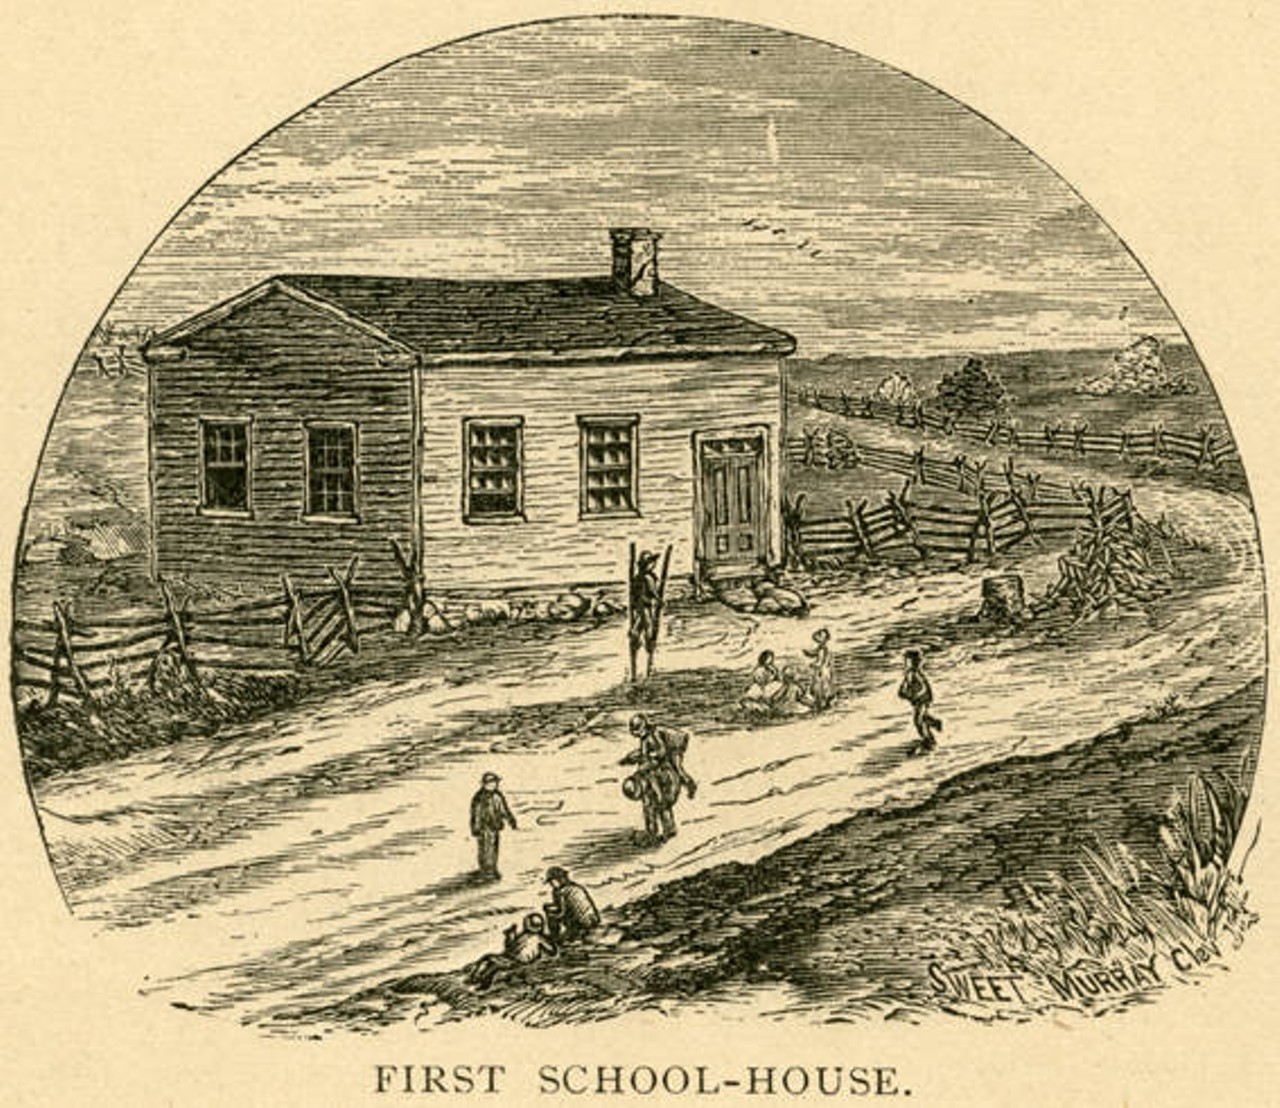  First School House in Cleveland, 1812 